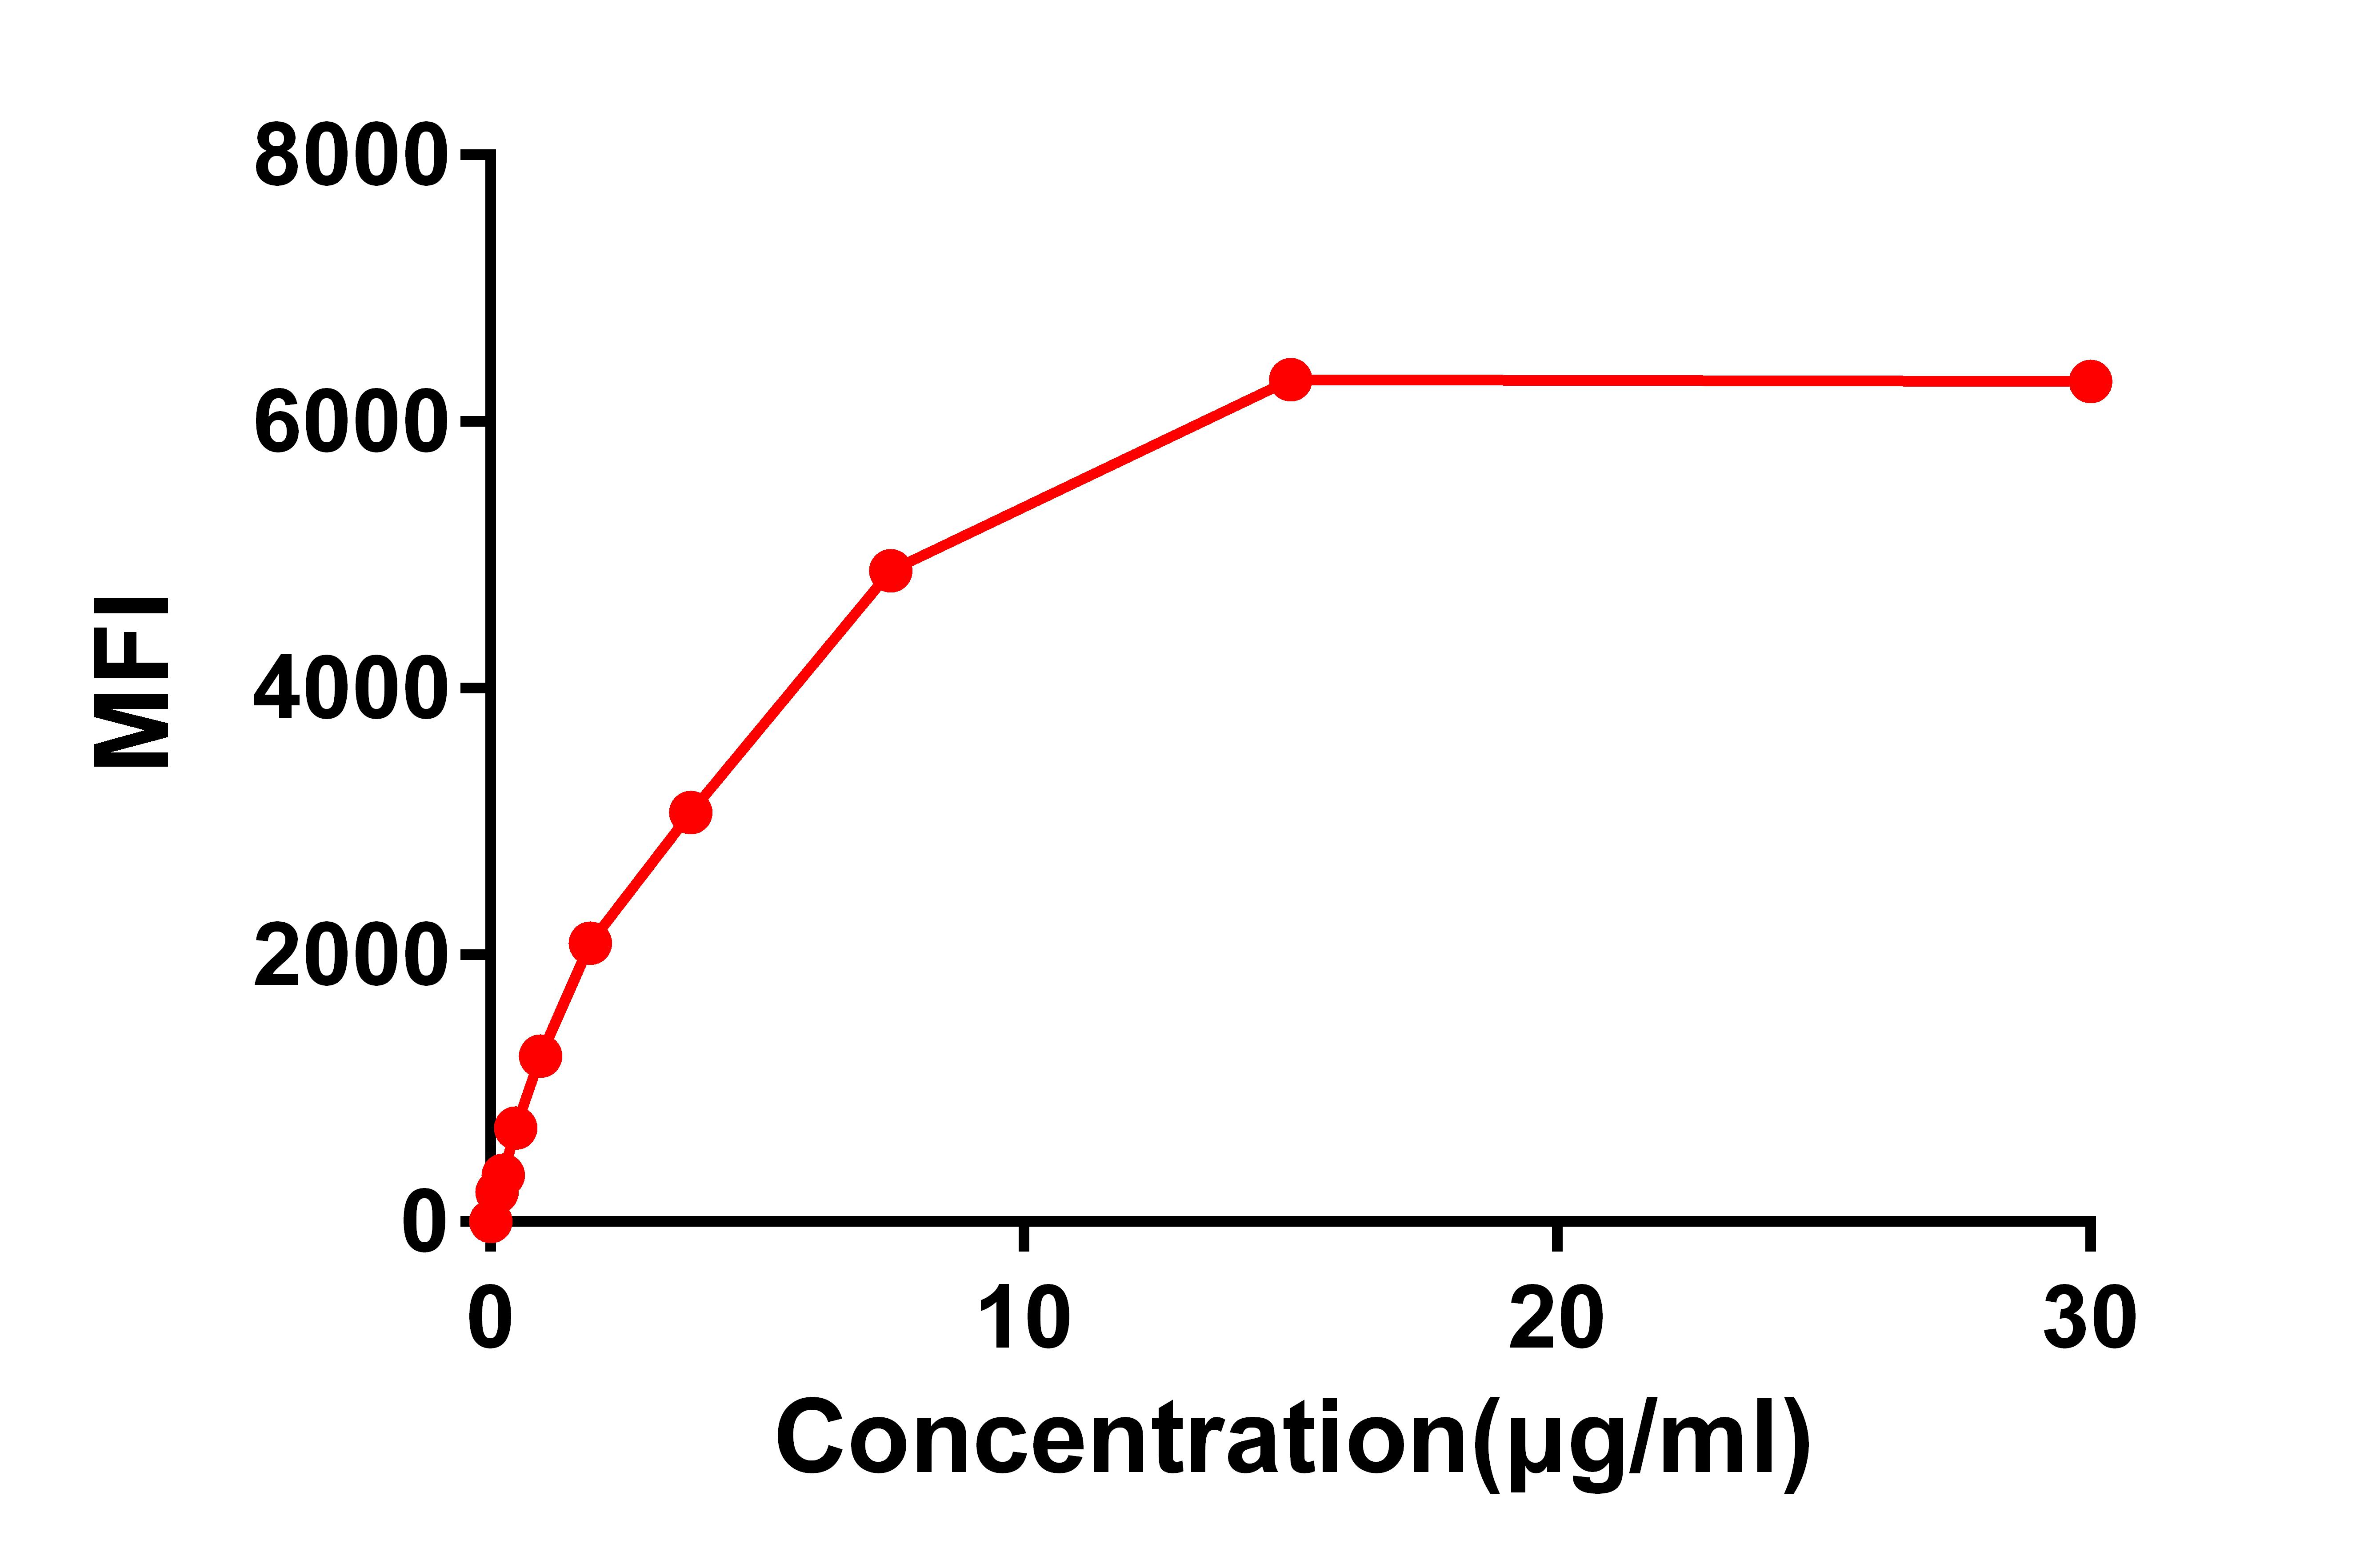 Figure 2. FACS data of serially titrated Rabbit anti-CS1 monoclonal antibody (clone: DM9) on Raji cells. The Y-axis represents the mean fluorescence intensity (MFI) while the X-axis represents the concentration of IgG used.